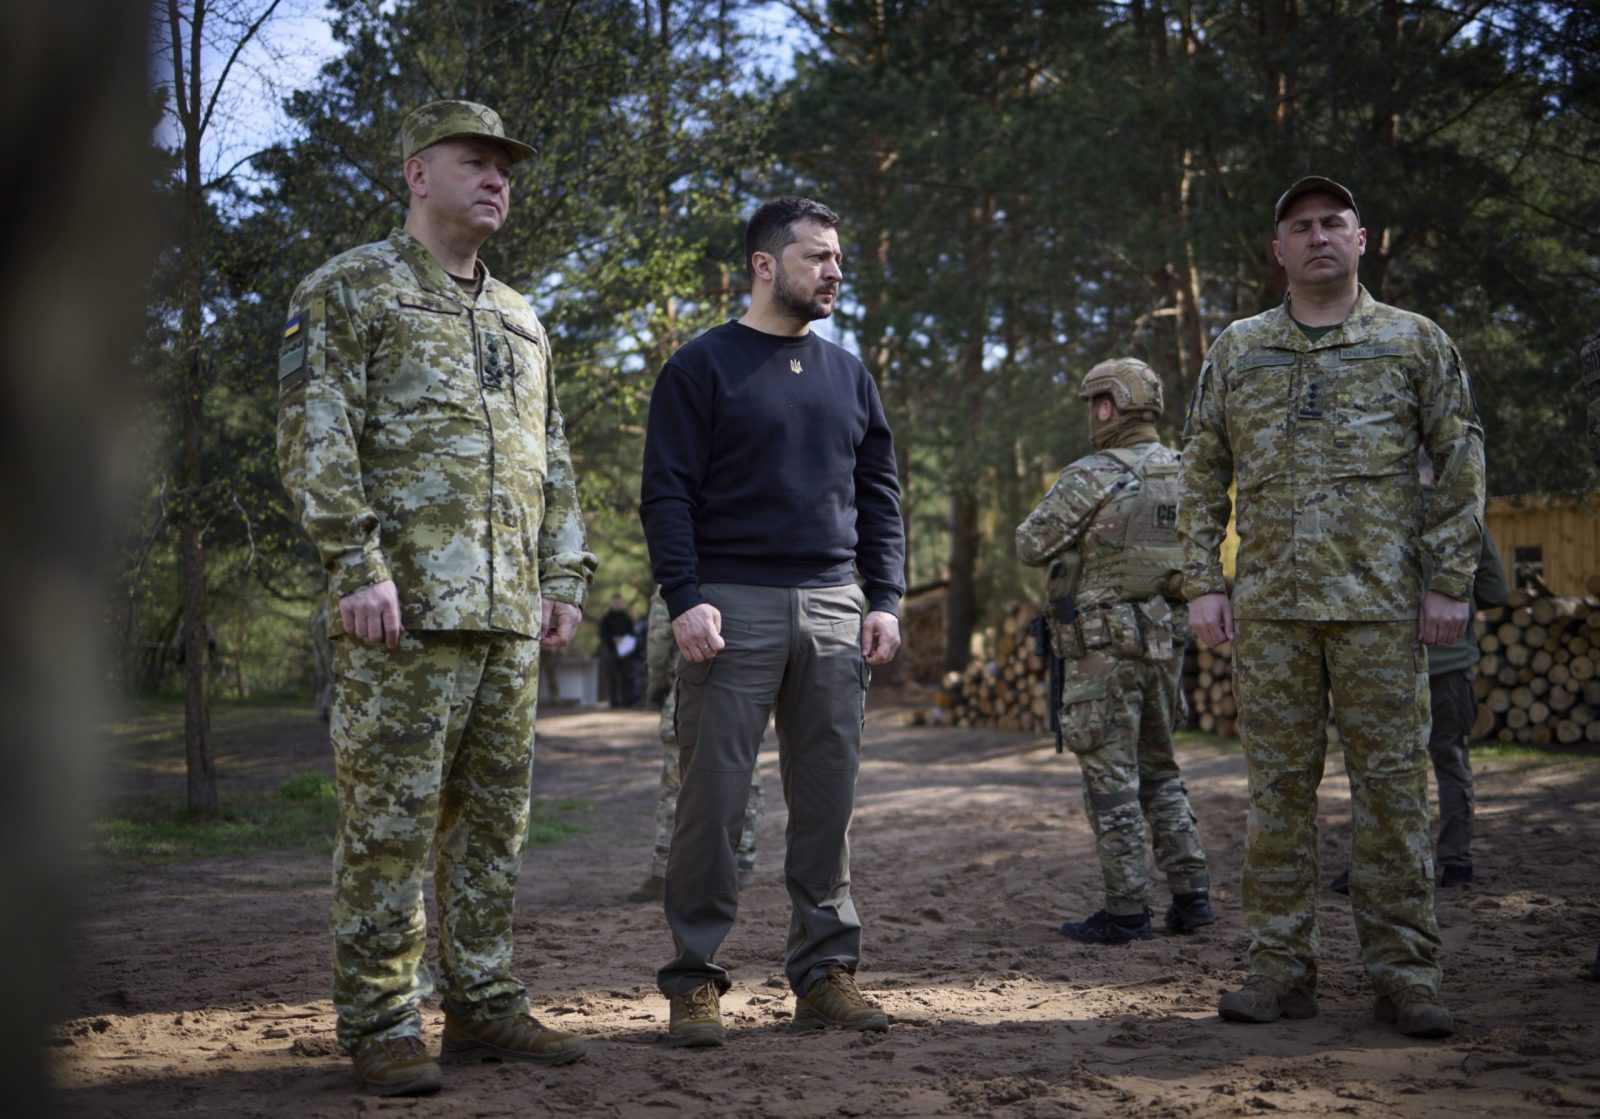 epa10580330 A handout photo made available by Ukraine's Presidential Press Service shows Ukraine's President Volodymyr Zelensky (C) meeting with Ukrainian servicemen during a working visit to the Volyn region, North-Western Ukraine, 19 April 2023, amid the Russian invasion. Zelensky visited the area where Ukraine borders both Poland and Belarus. Russian troops entered Ukrainian territory in February 2022, starting a conflict that has provoked destruction and a humanitarian crisis.  EPA/PRESIDENTIAL PRESS SERVICE HANDOUT HANDOUT  HANDOUT EDITORIAL USE ONLY/NO SALES